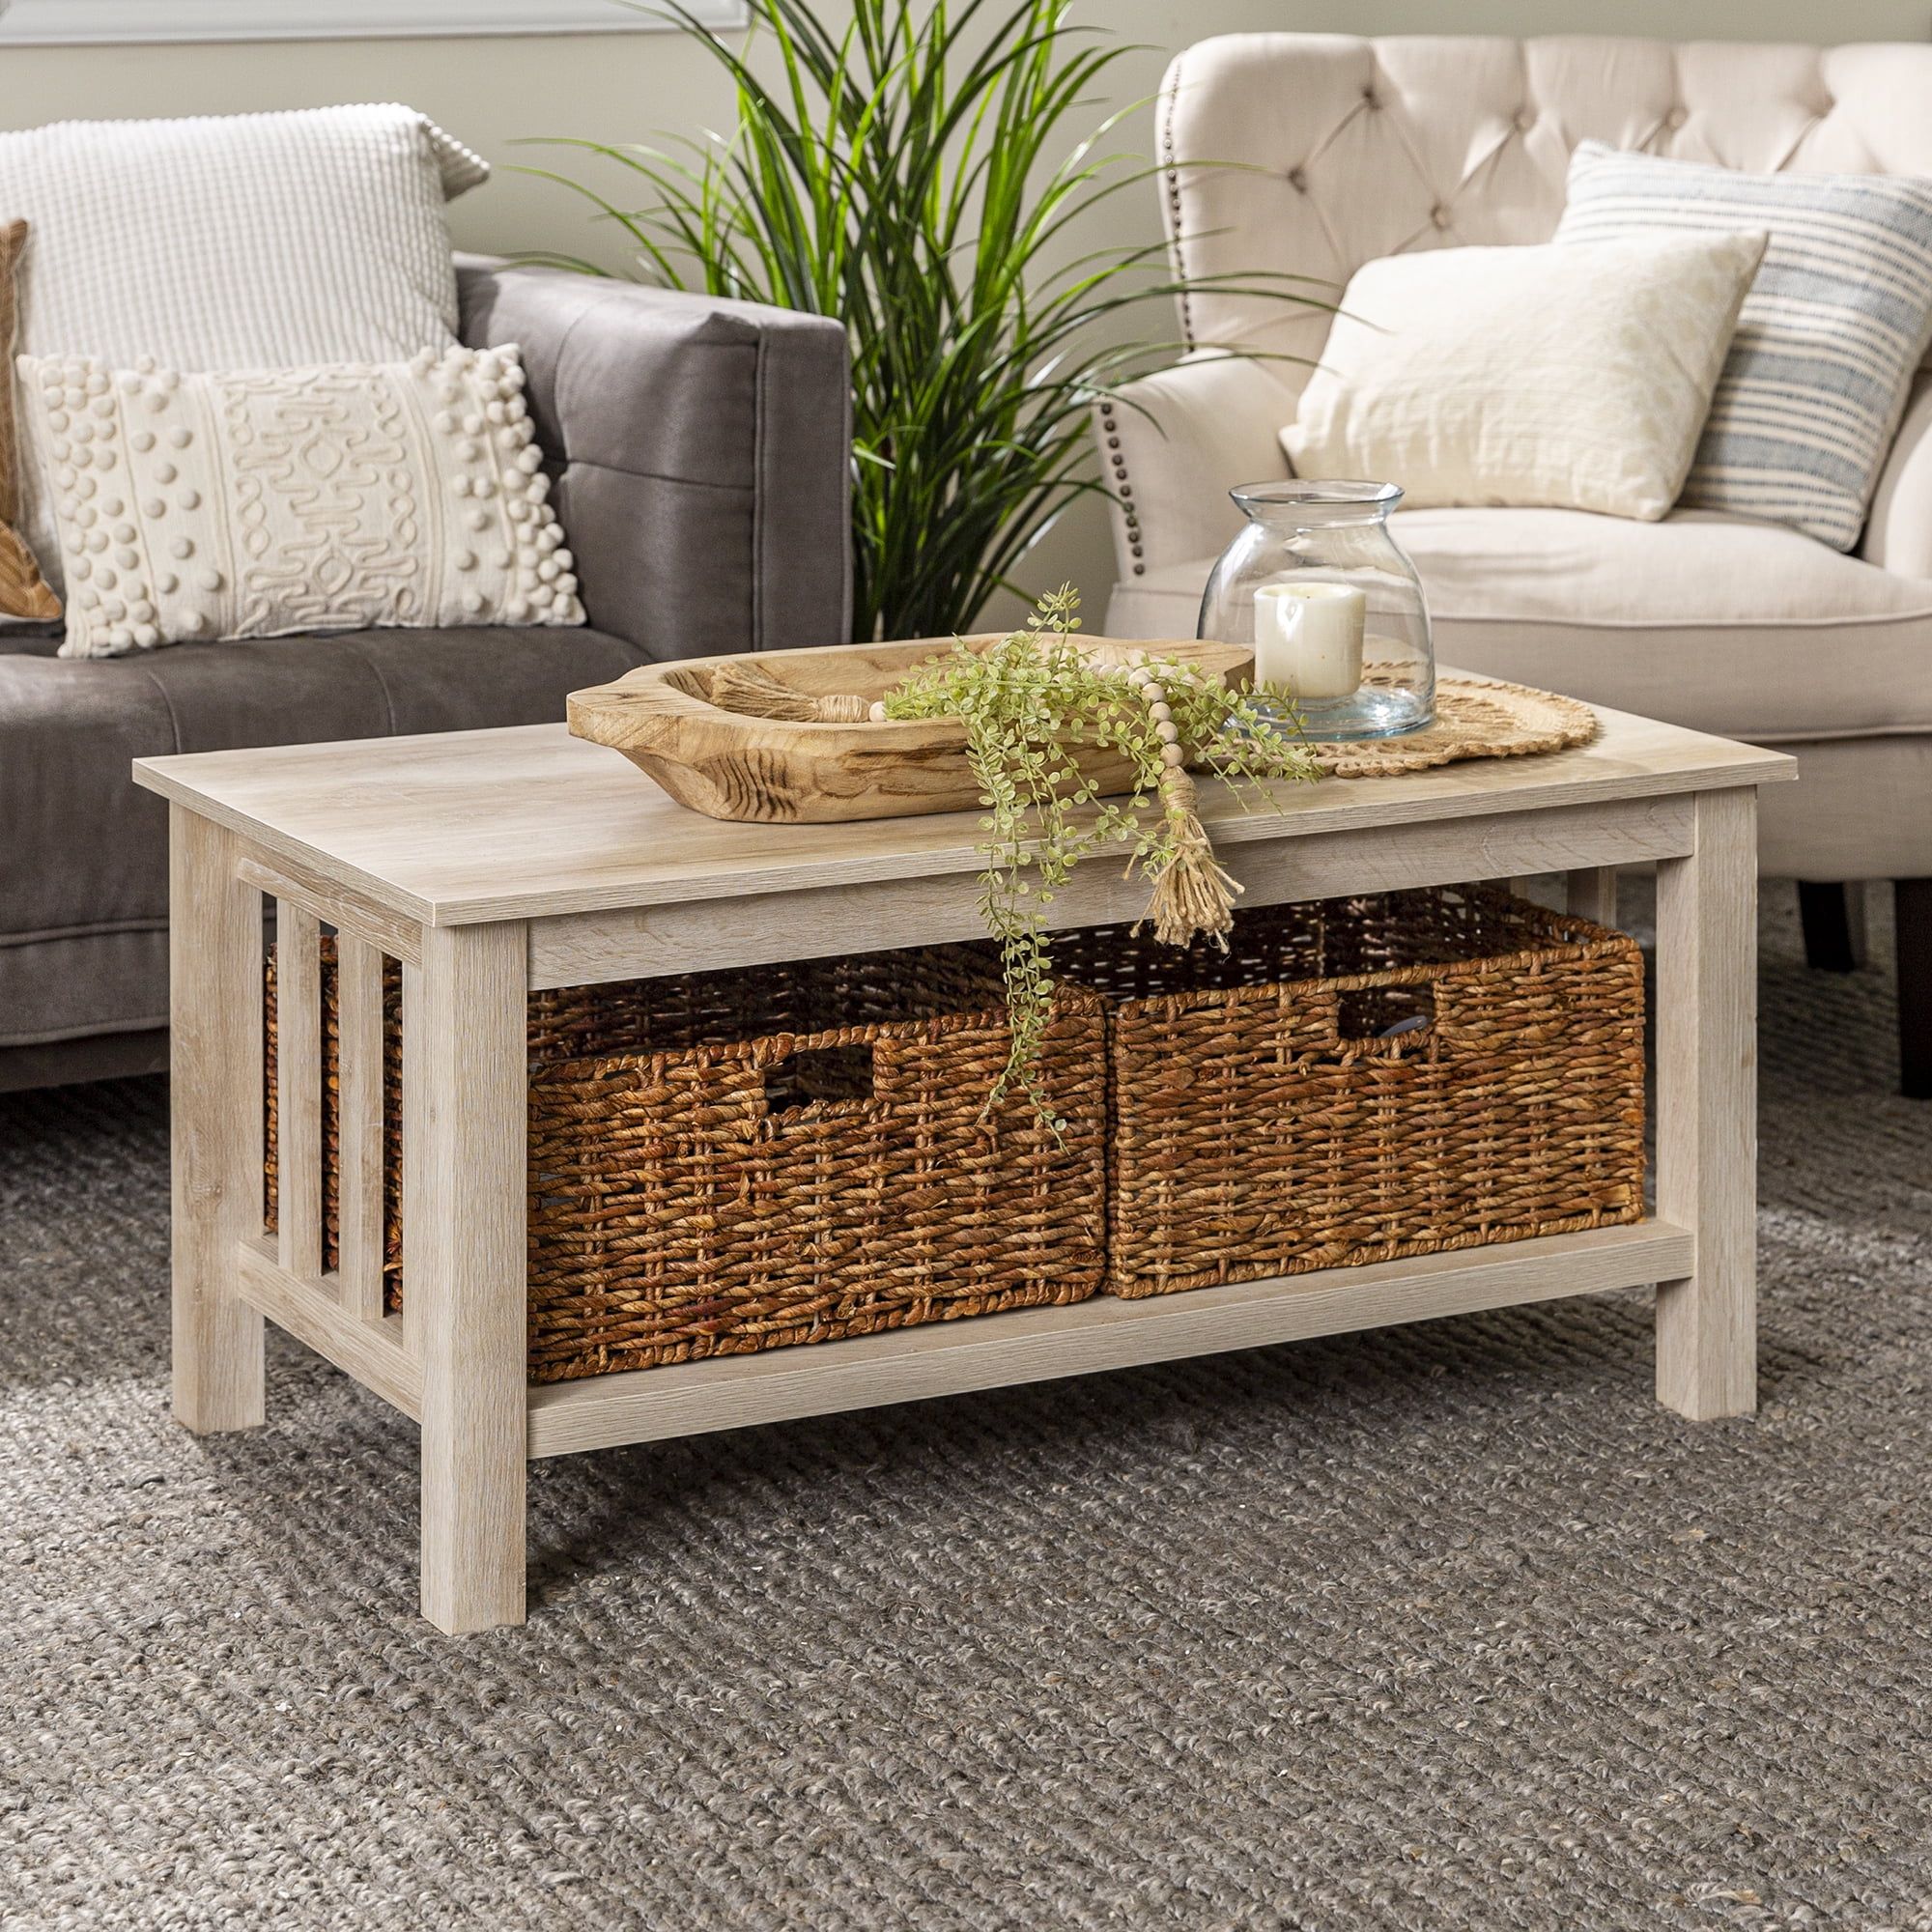 Woven Paths Traditional Storage Coffee Table With Bins, White Oak With Coffee Tables With Open Storage Shelves (View 13 of 15)